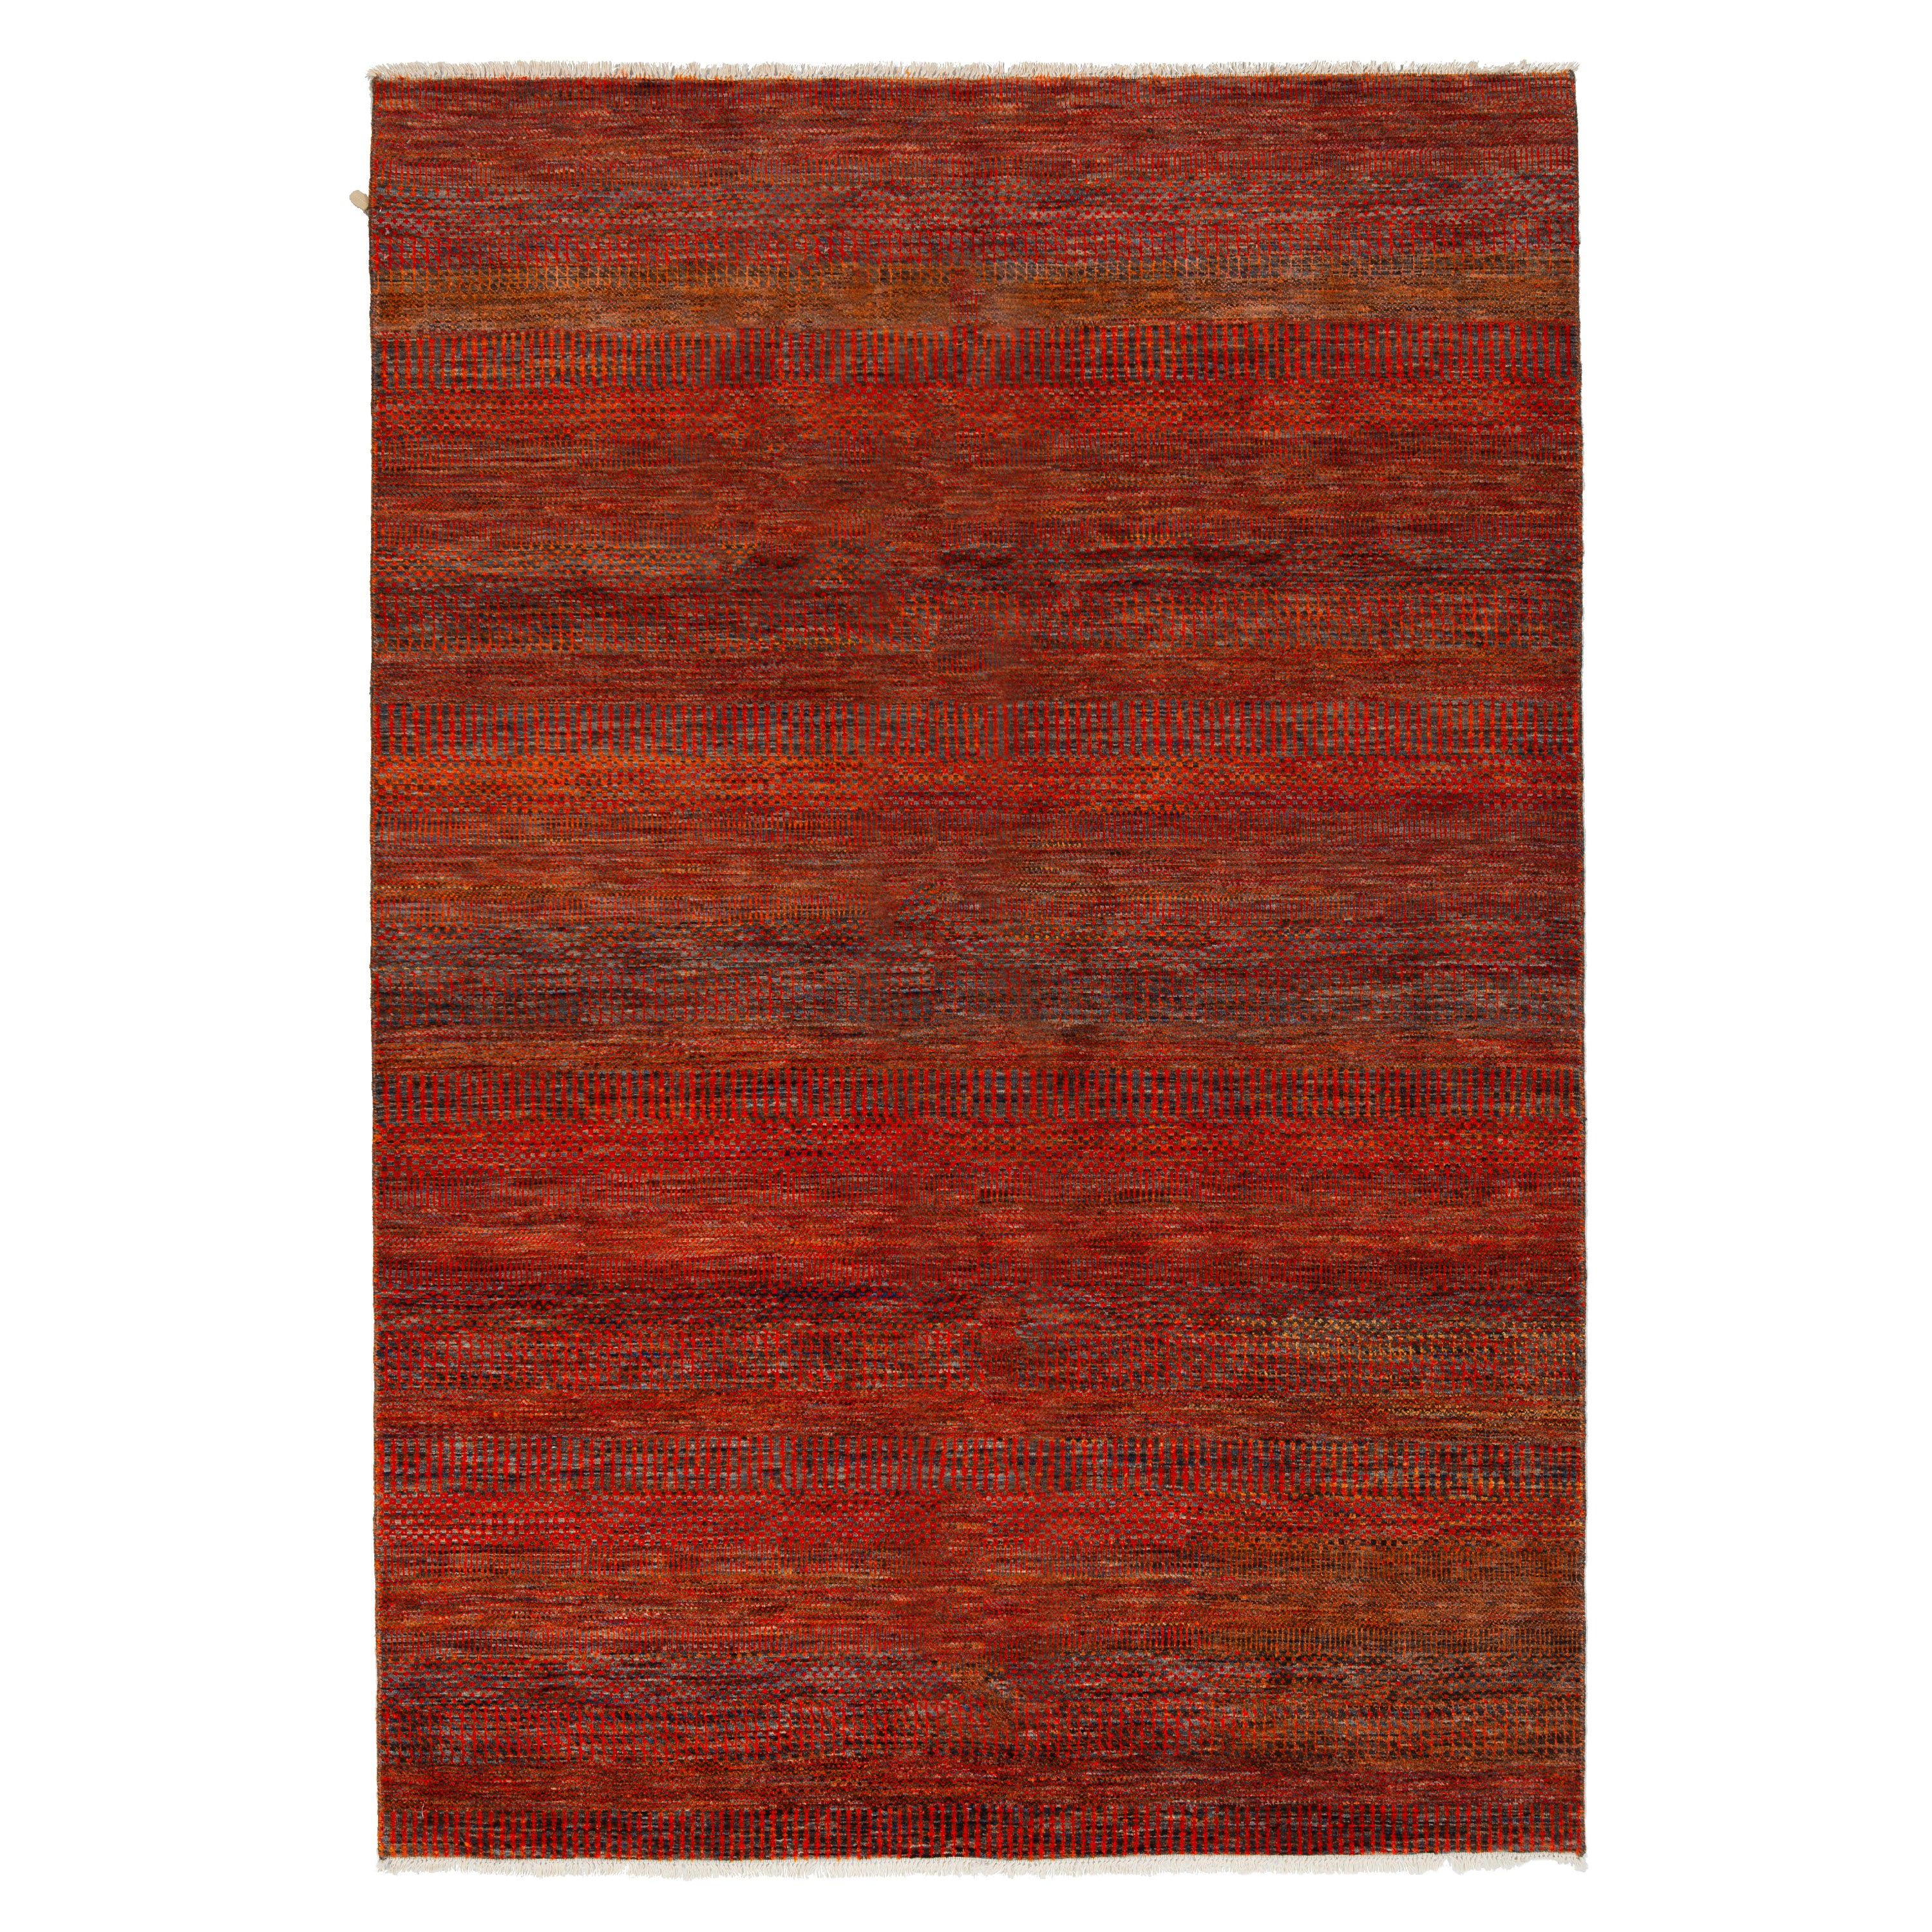 Hand-knotted Wool Rug - 9' x 6'2" Default Title